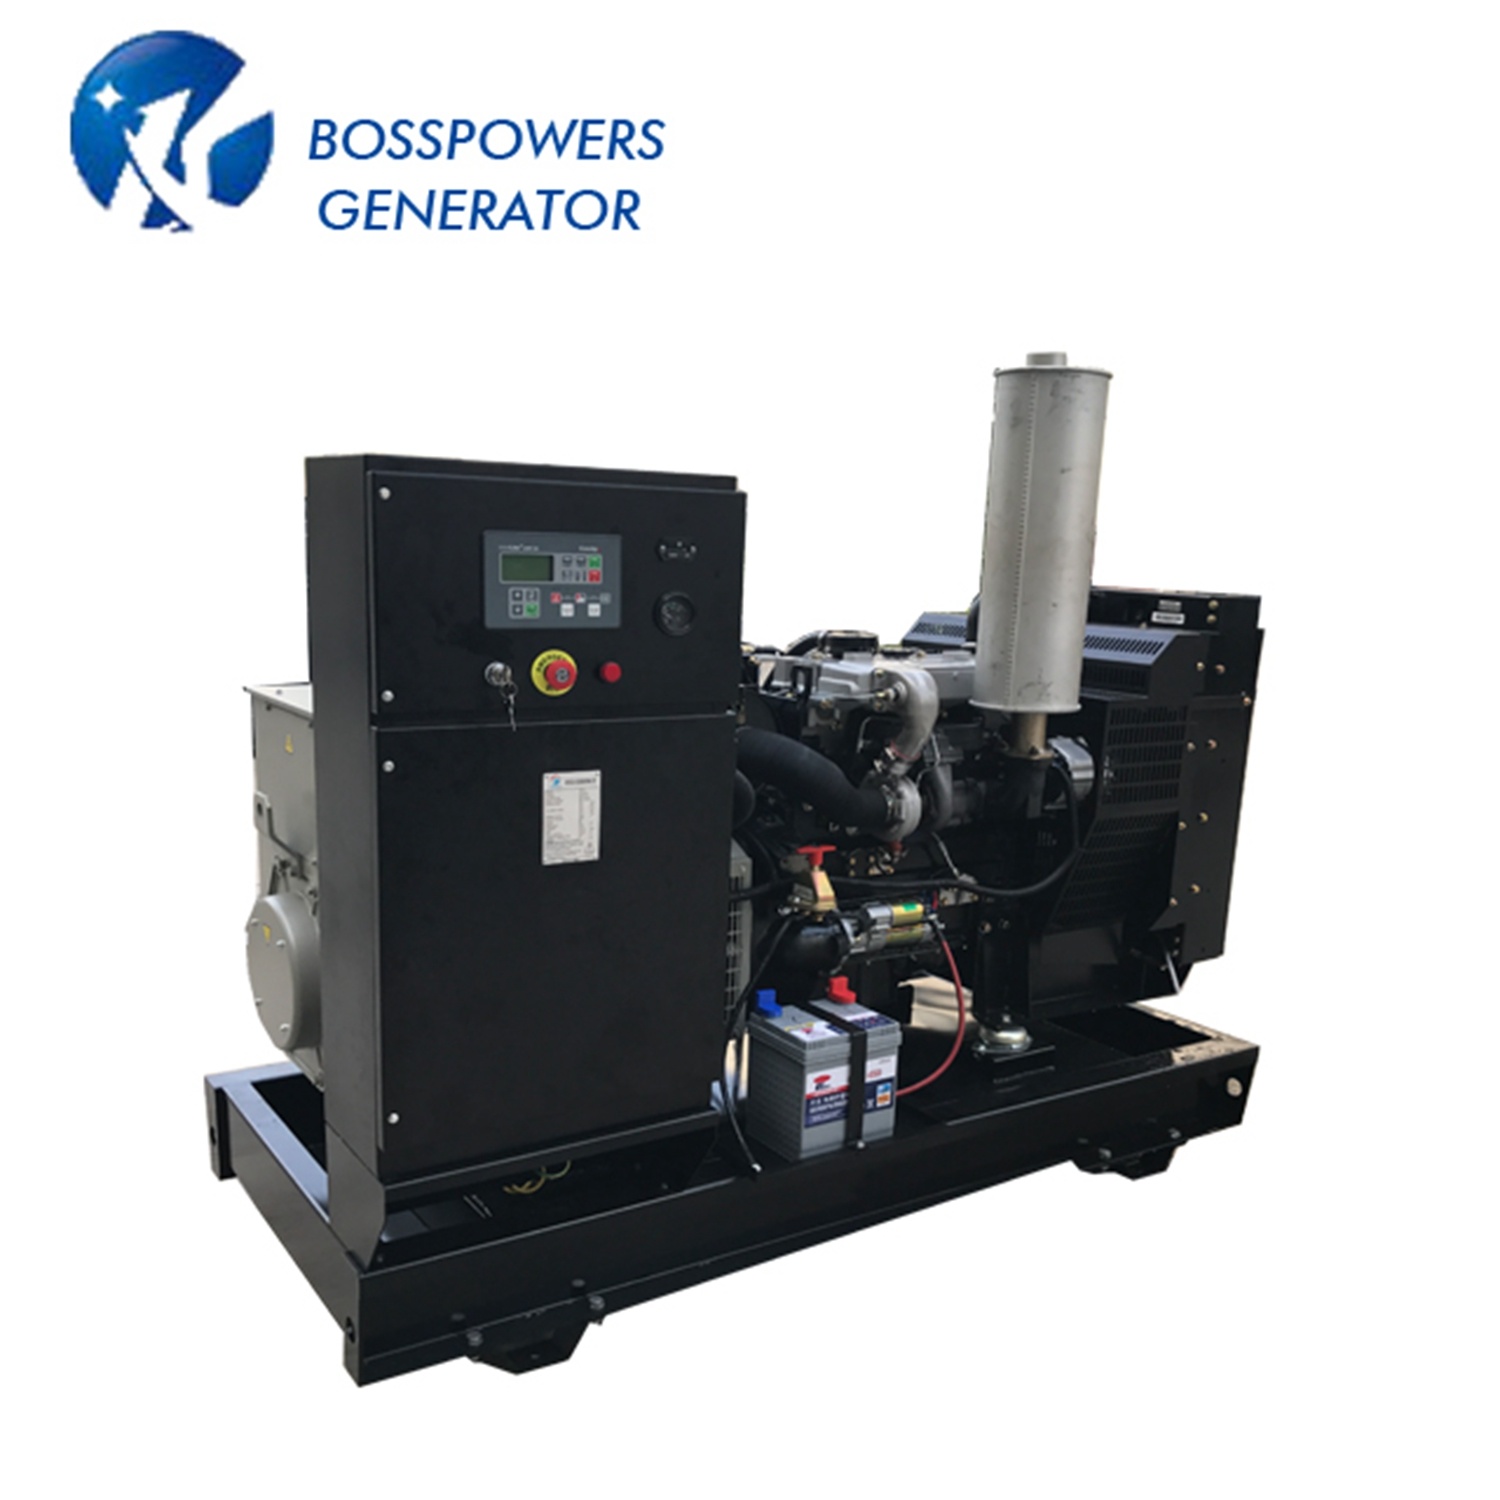 Chinese Lovol 1006tg2a Engine 80kw 100kVA Soundproof Diesel Generator